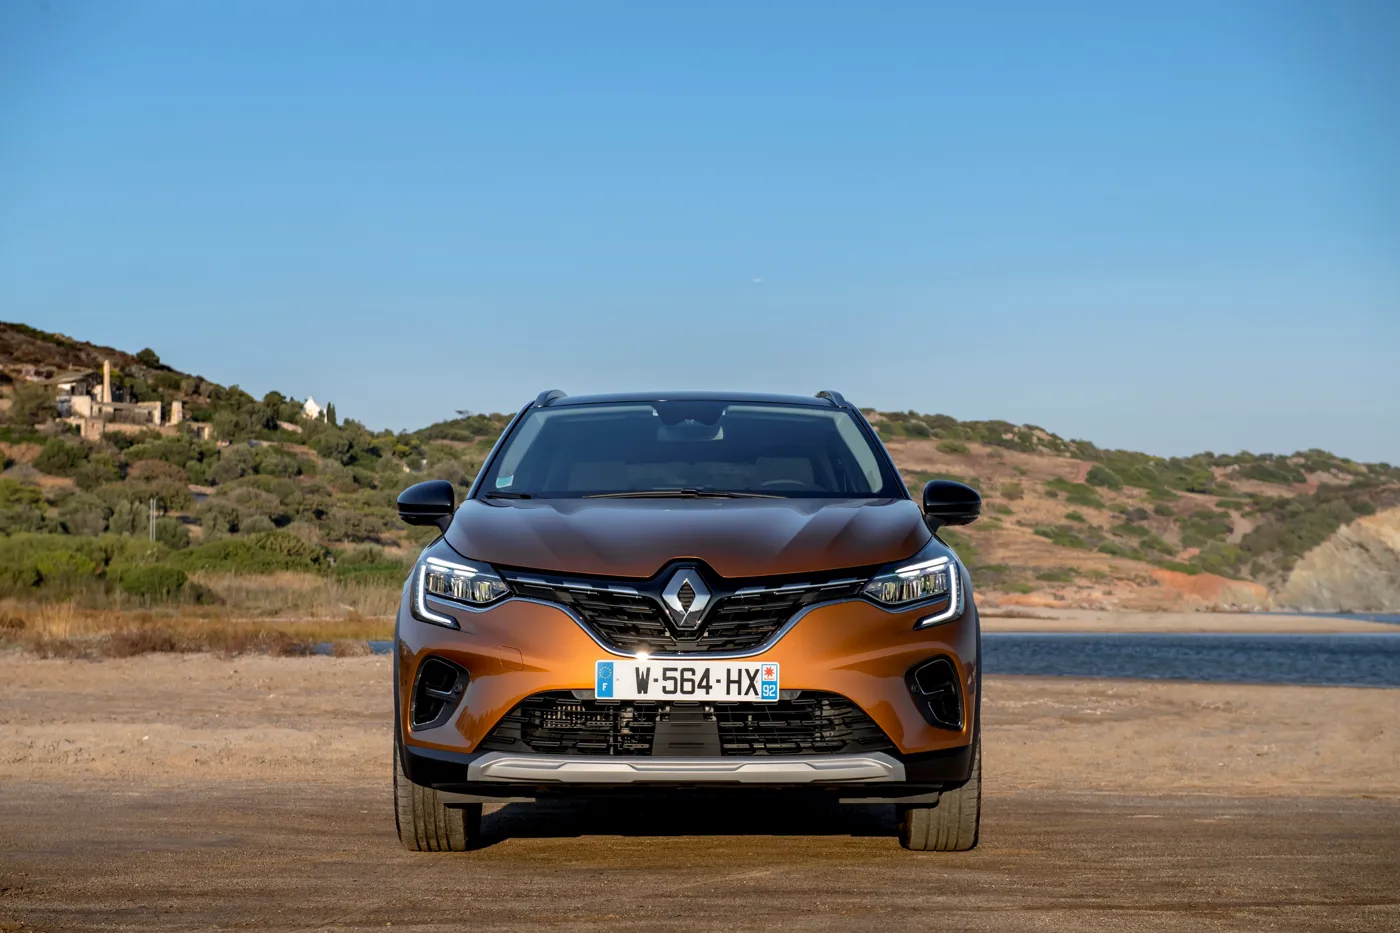 2020 Renault Captur first drive review